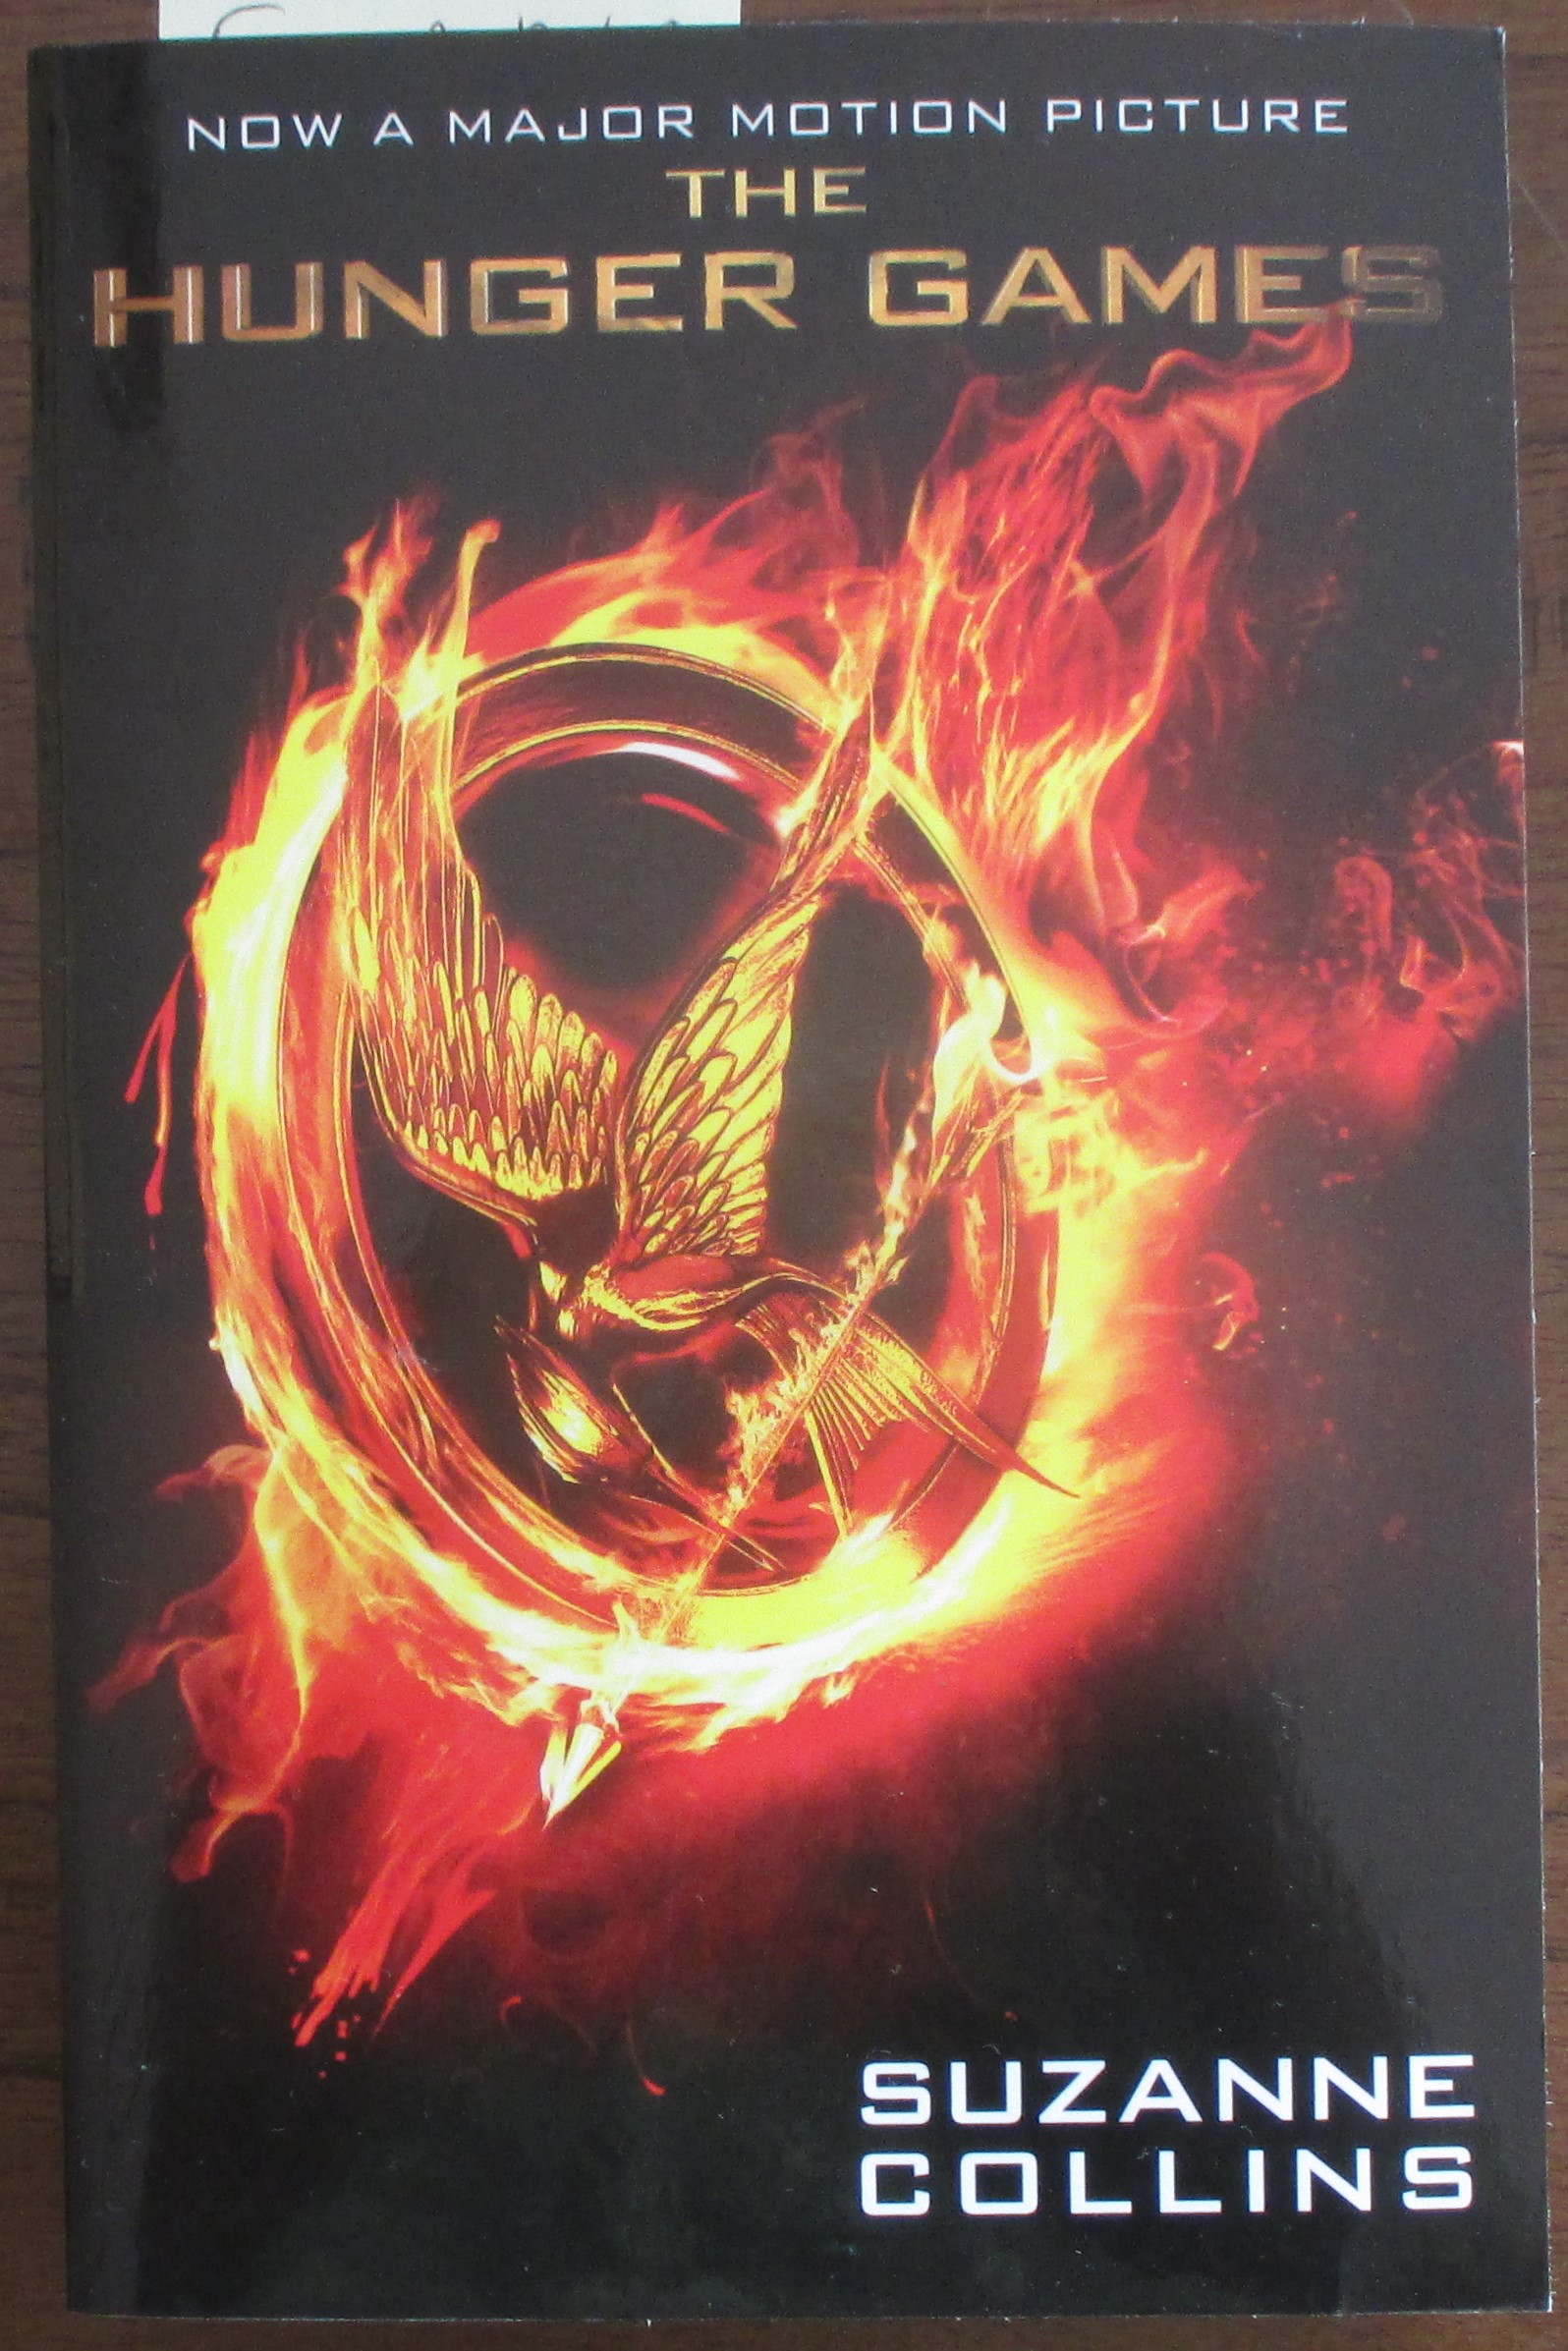 book review on the hunger games book 1